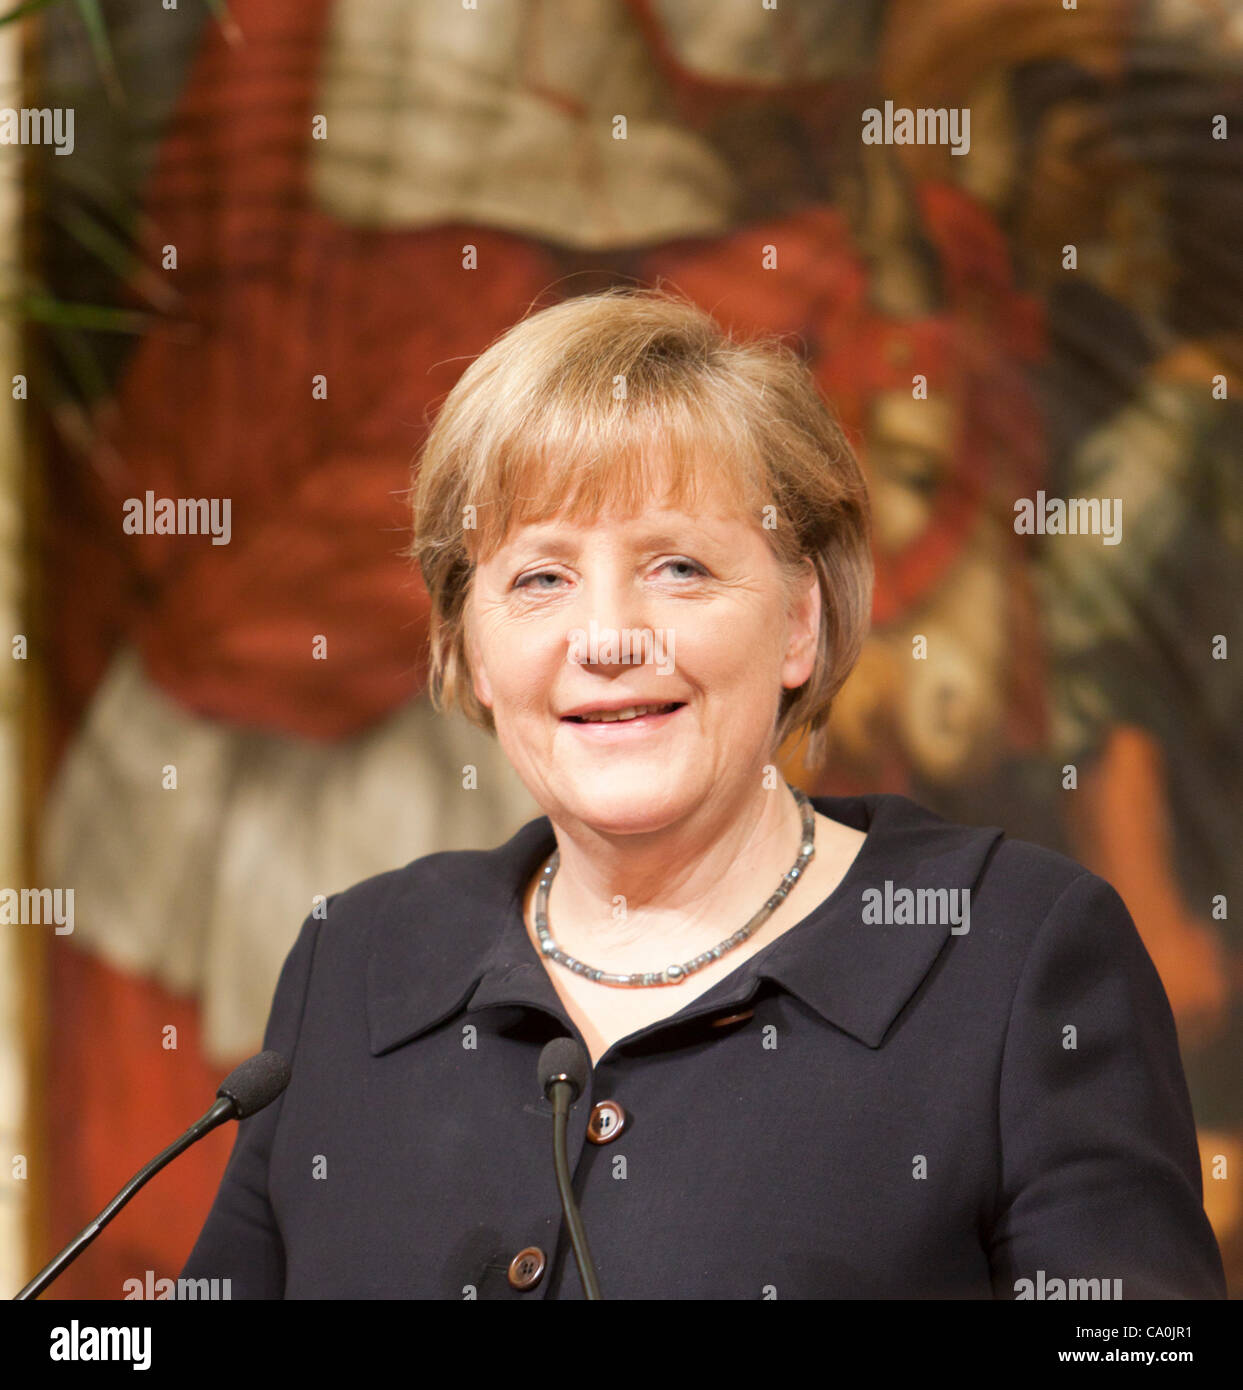 ROME, ITALY. TUESDAY, MARCH 13th 2012. German Chancellor Angela Merkel at a press conference following the Italo German summit at the Palazzo Chigi in Rome. Stock Photo